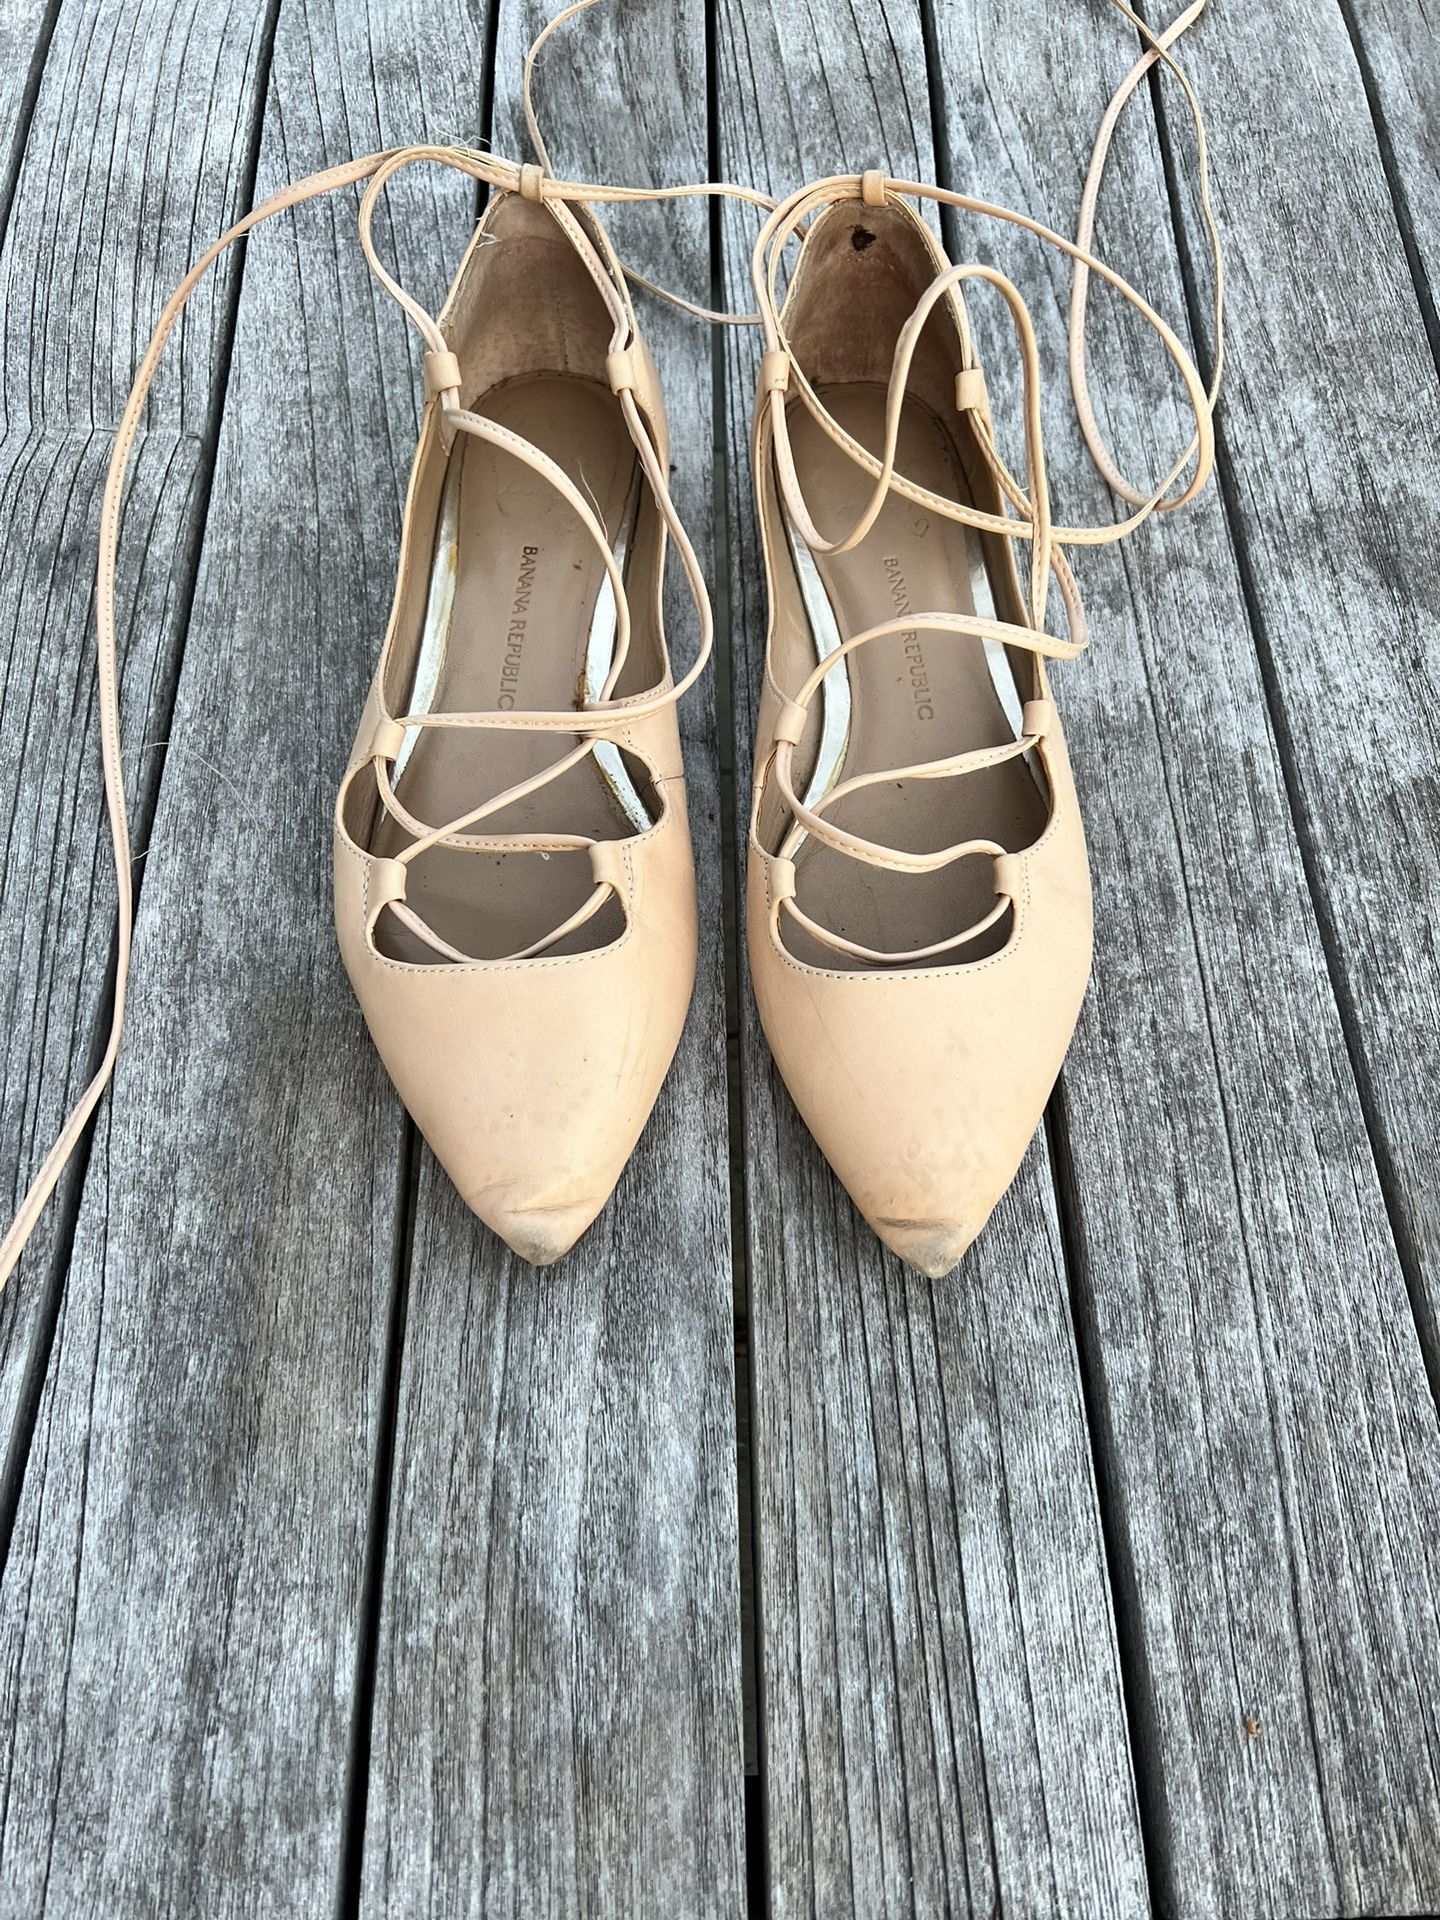 Banana Republic ‘Allie’ Lace Up Pointed Ballet Flats Sz 7 Pink/Nude